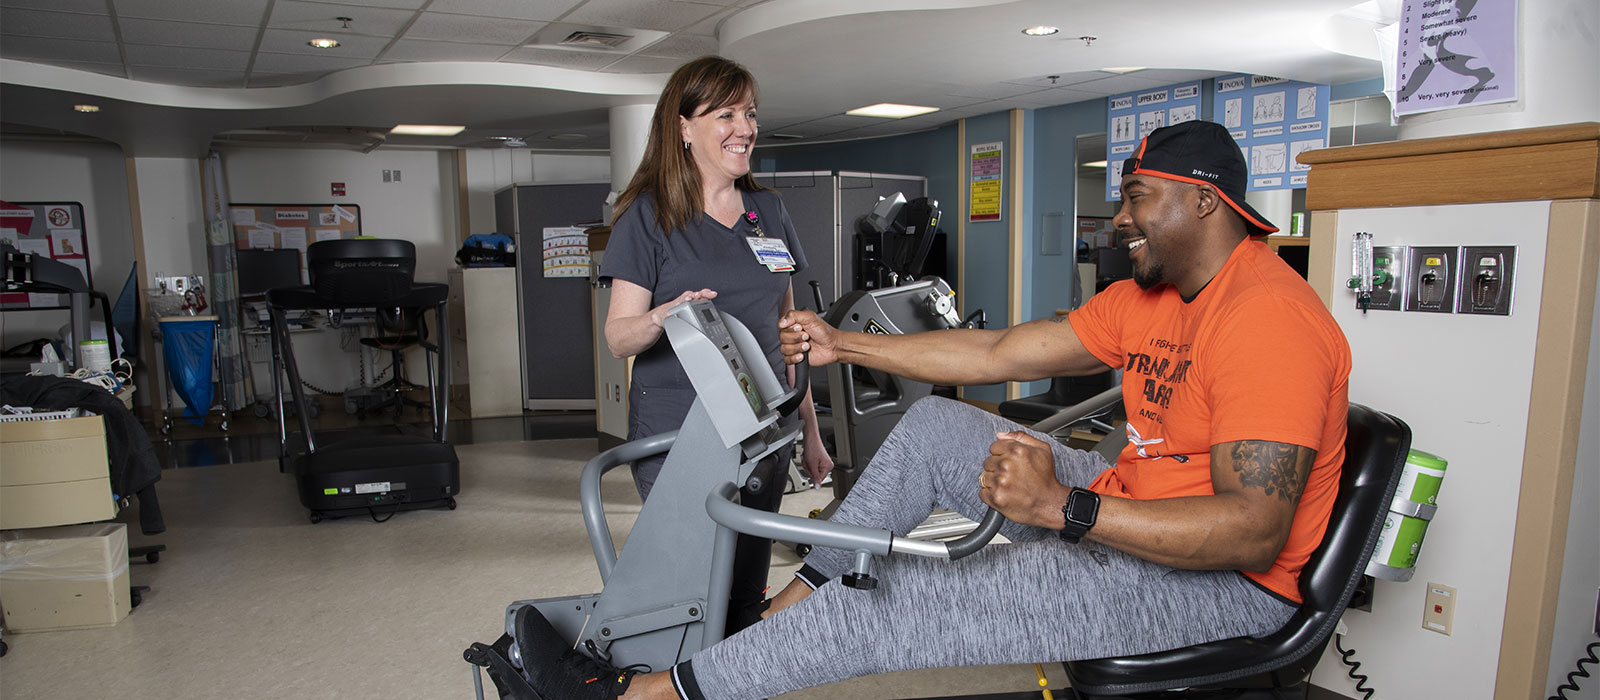 Lung patient on stationary bike 